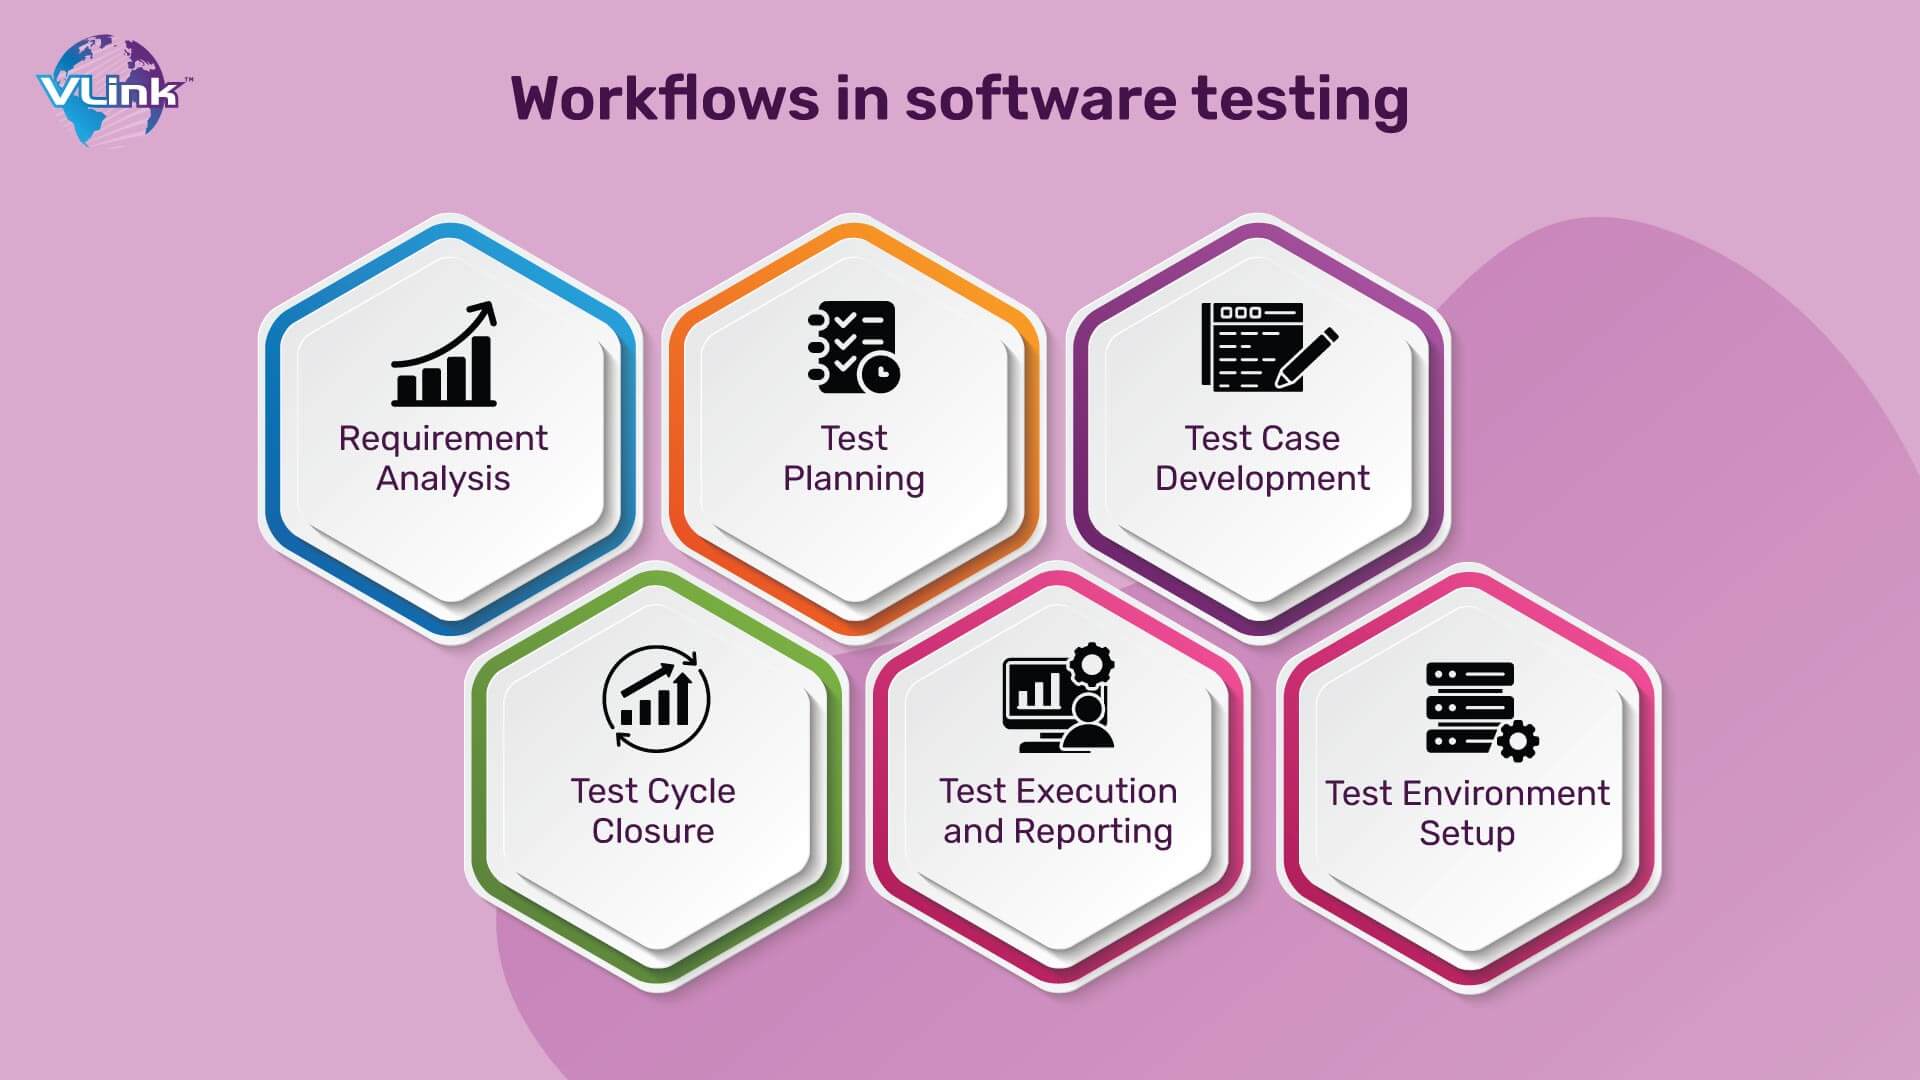 Workflows in software testing